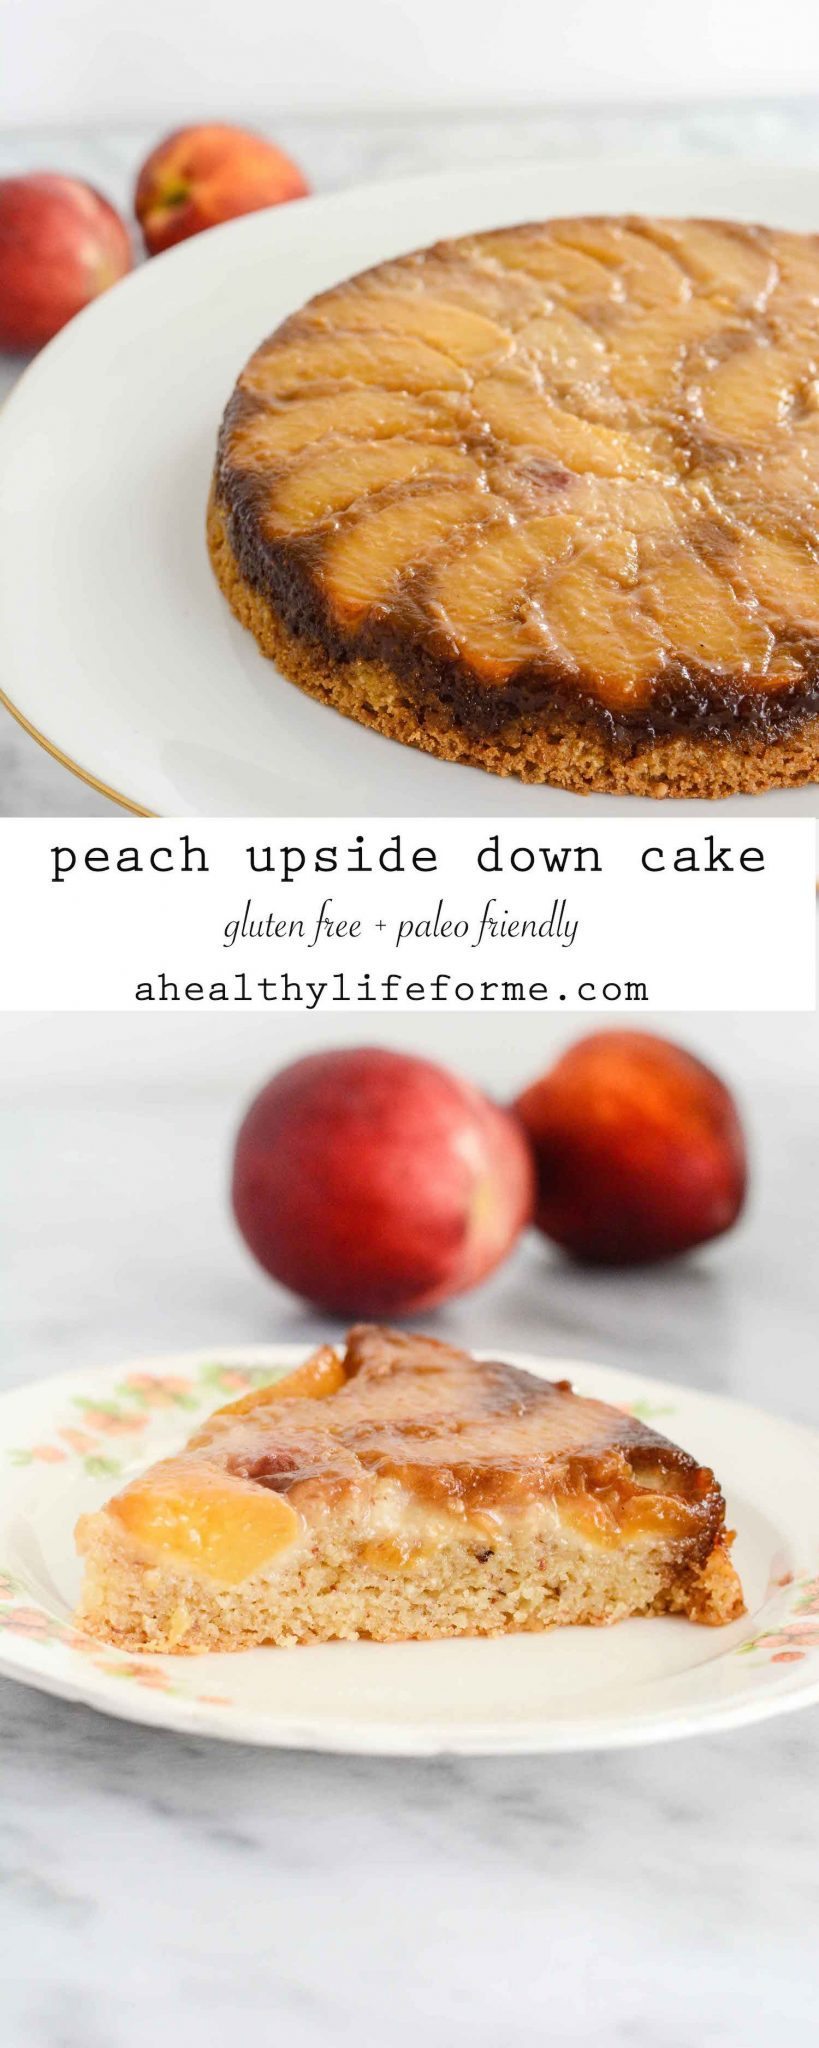  Peach Upside Down Cake is gluten free and paleo friendly moist delicious recipe | ahealthylifeforme.com